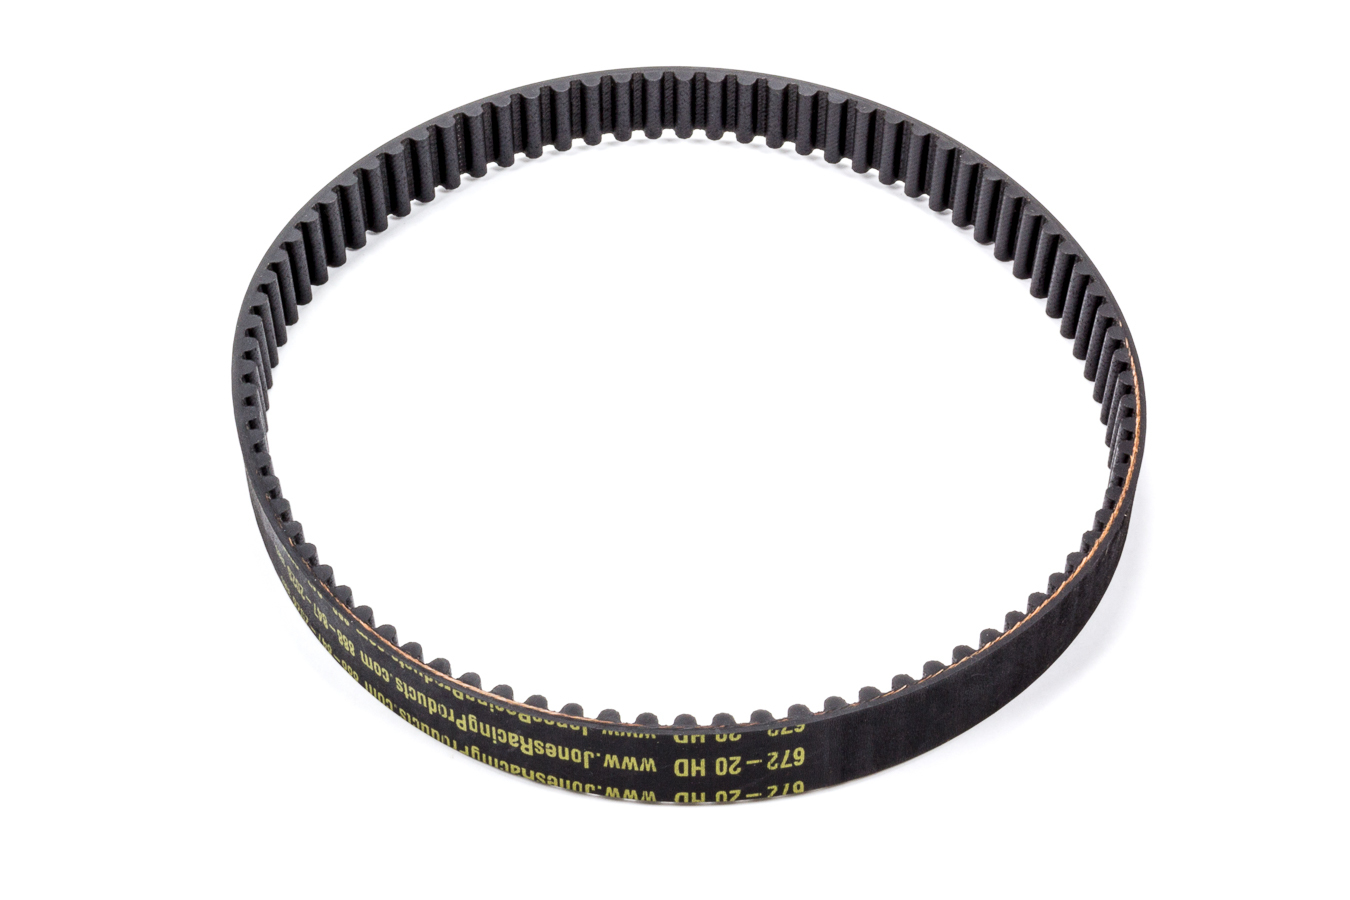 Jones Racing Products 672-20HD HTD Drive Belt, 26.460 in Long, 20 mm Wide, 8 mm Pitch, Each